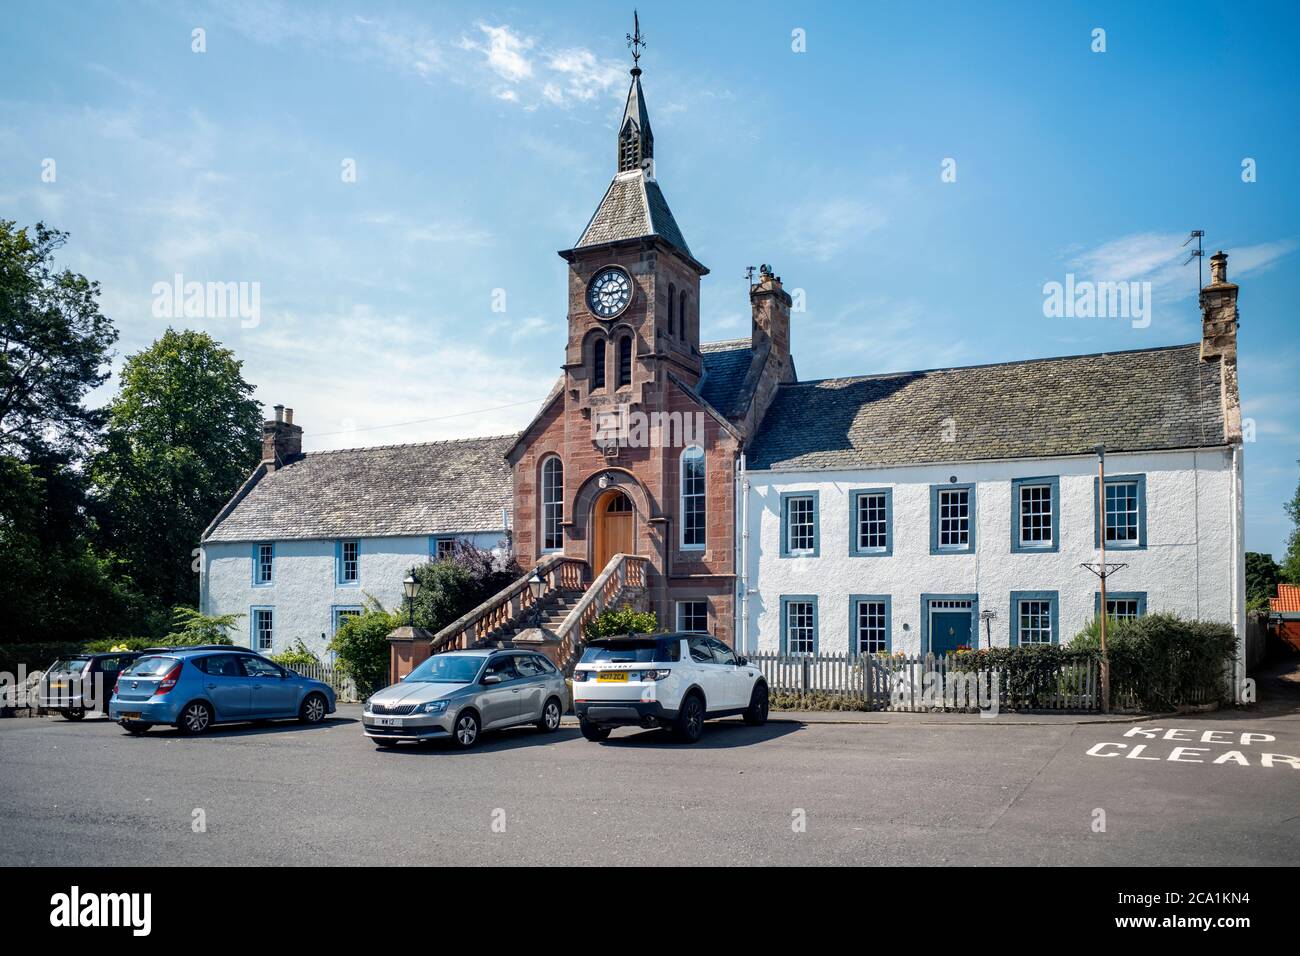 Gifford Town Hall, Gifford, East Lothian, Écosse, Royaume-Uni. Banque D'Images